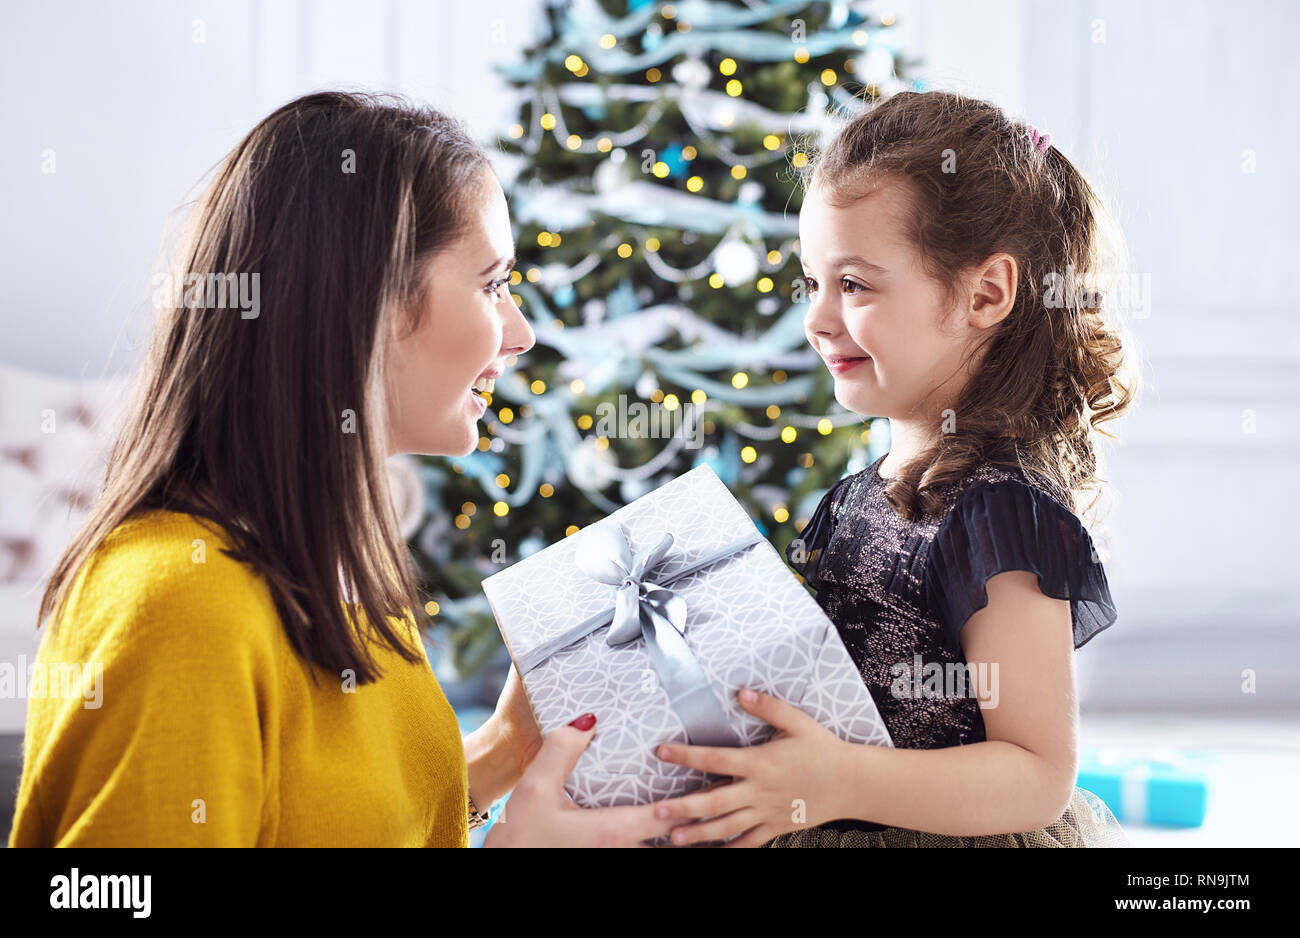 Mother giving a present to her beloved daughter Stock Photo